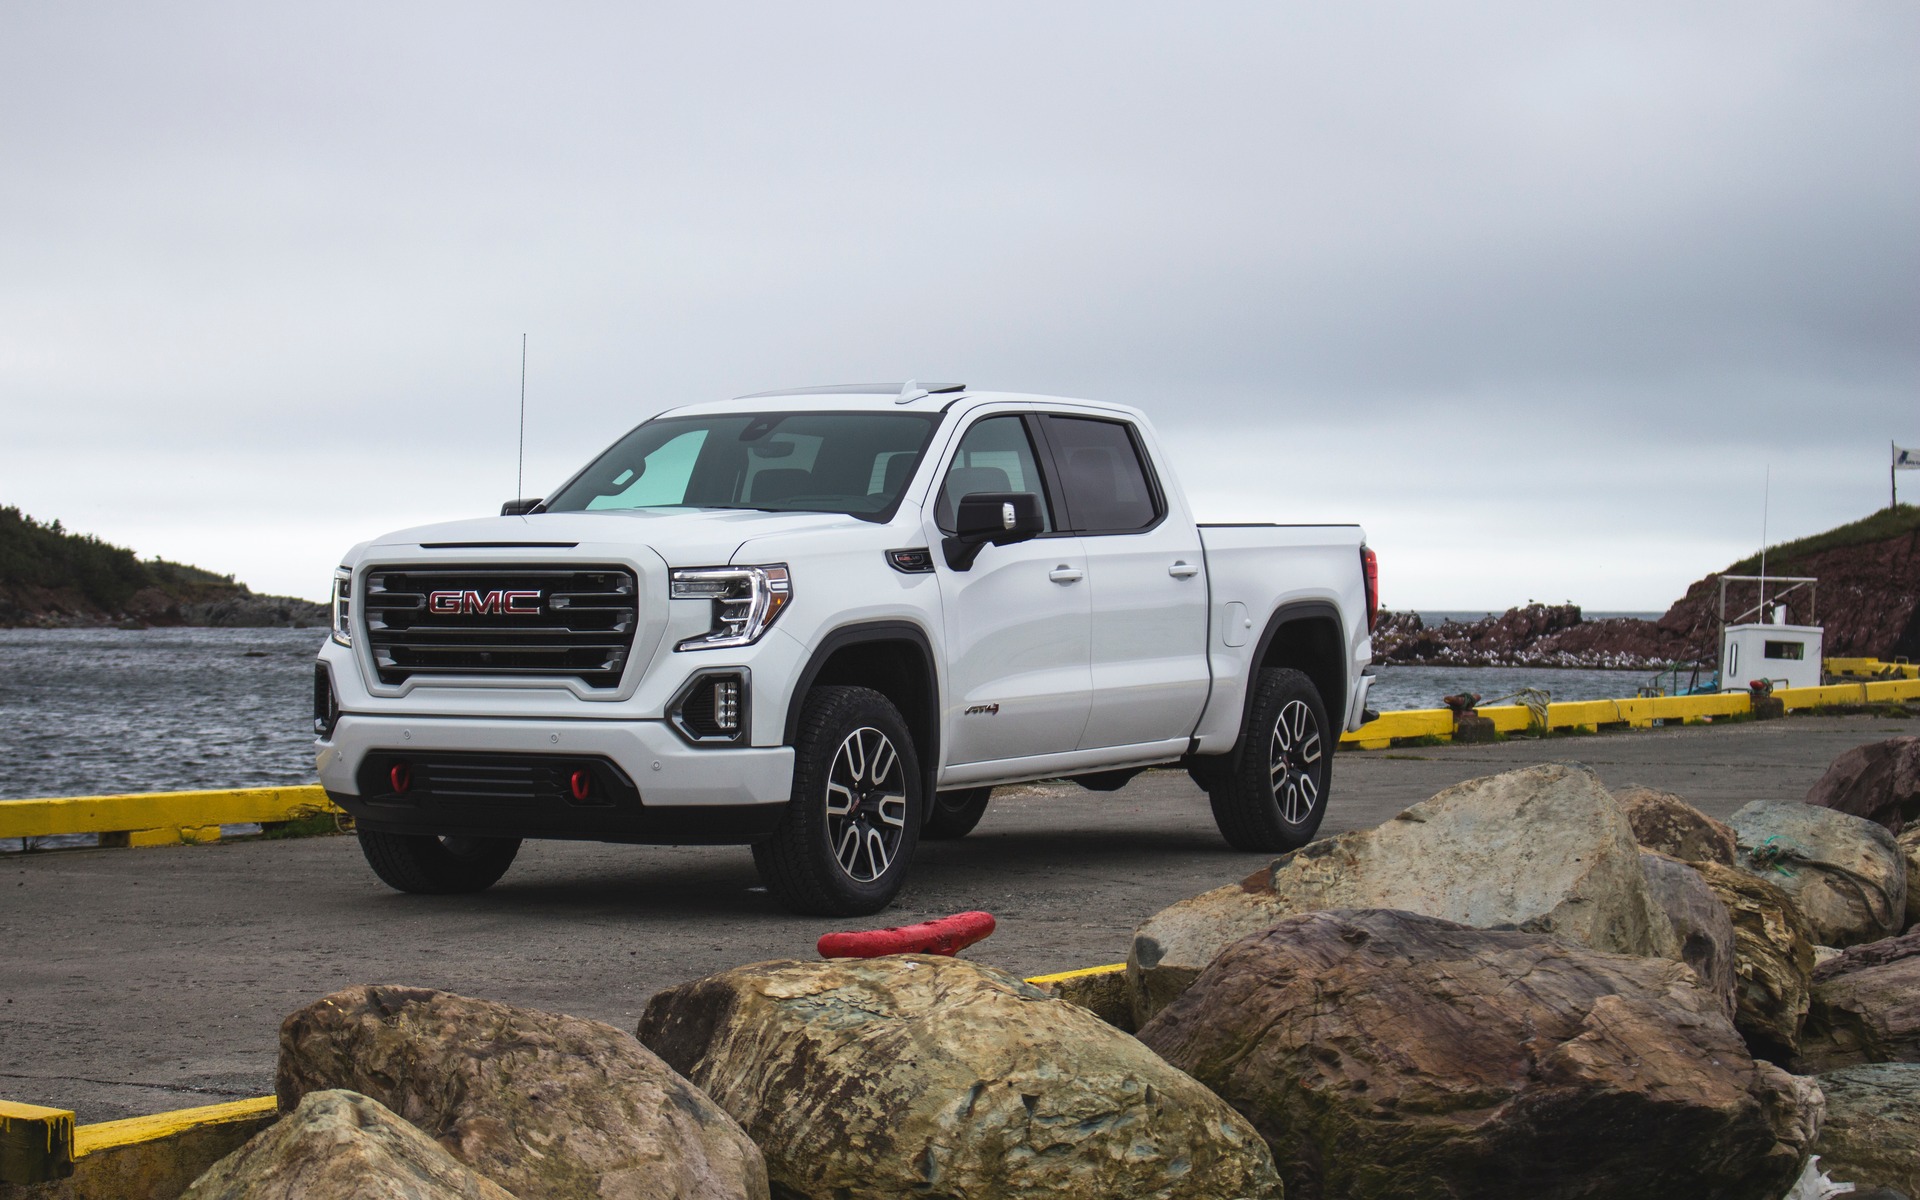 2019 GMC Sierra 1500: Finally Different - The Car Guide